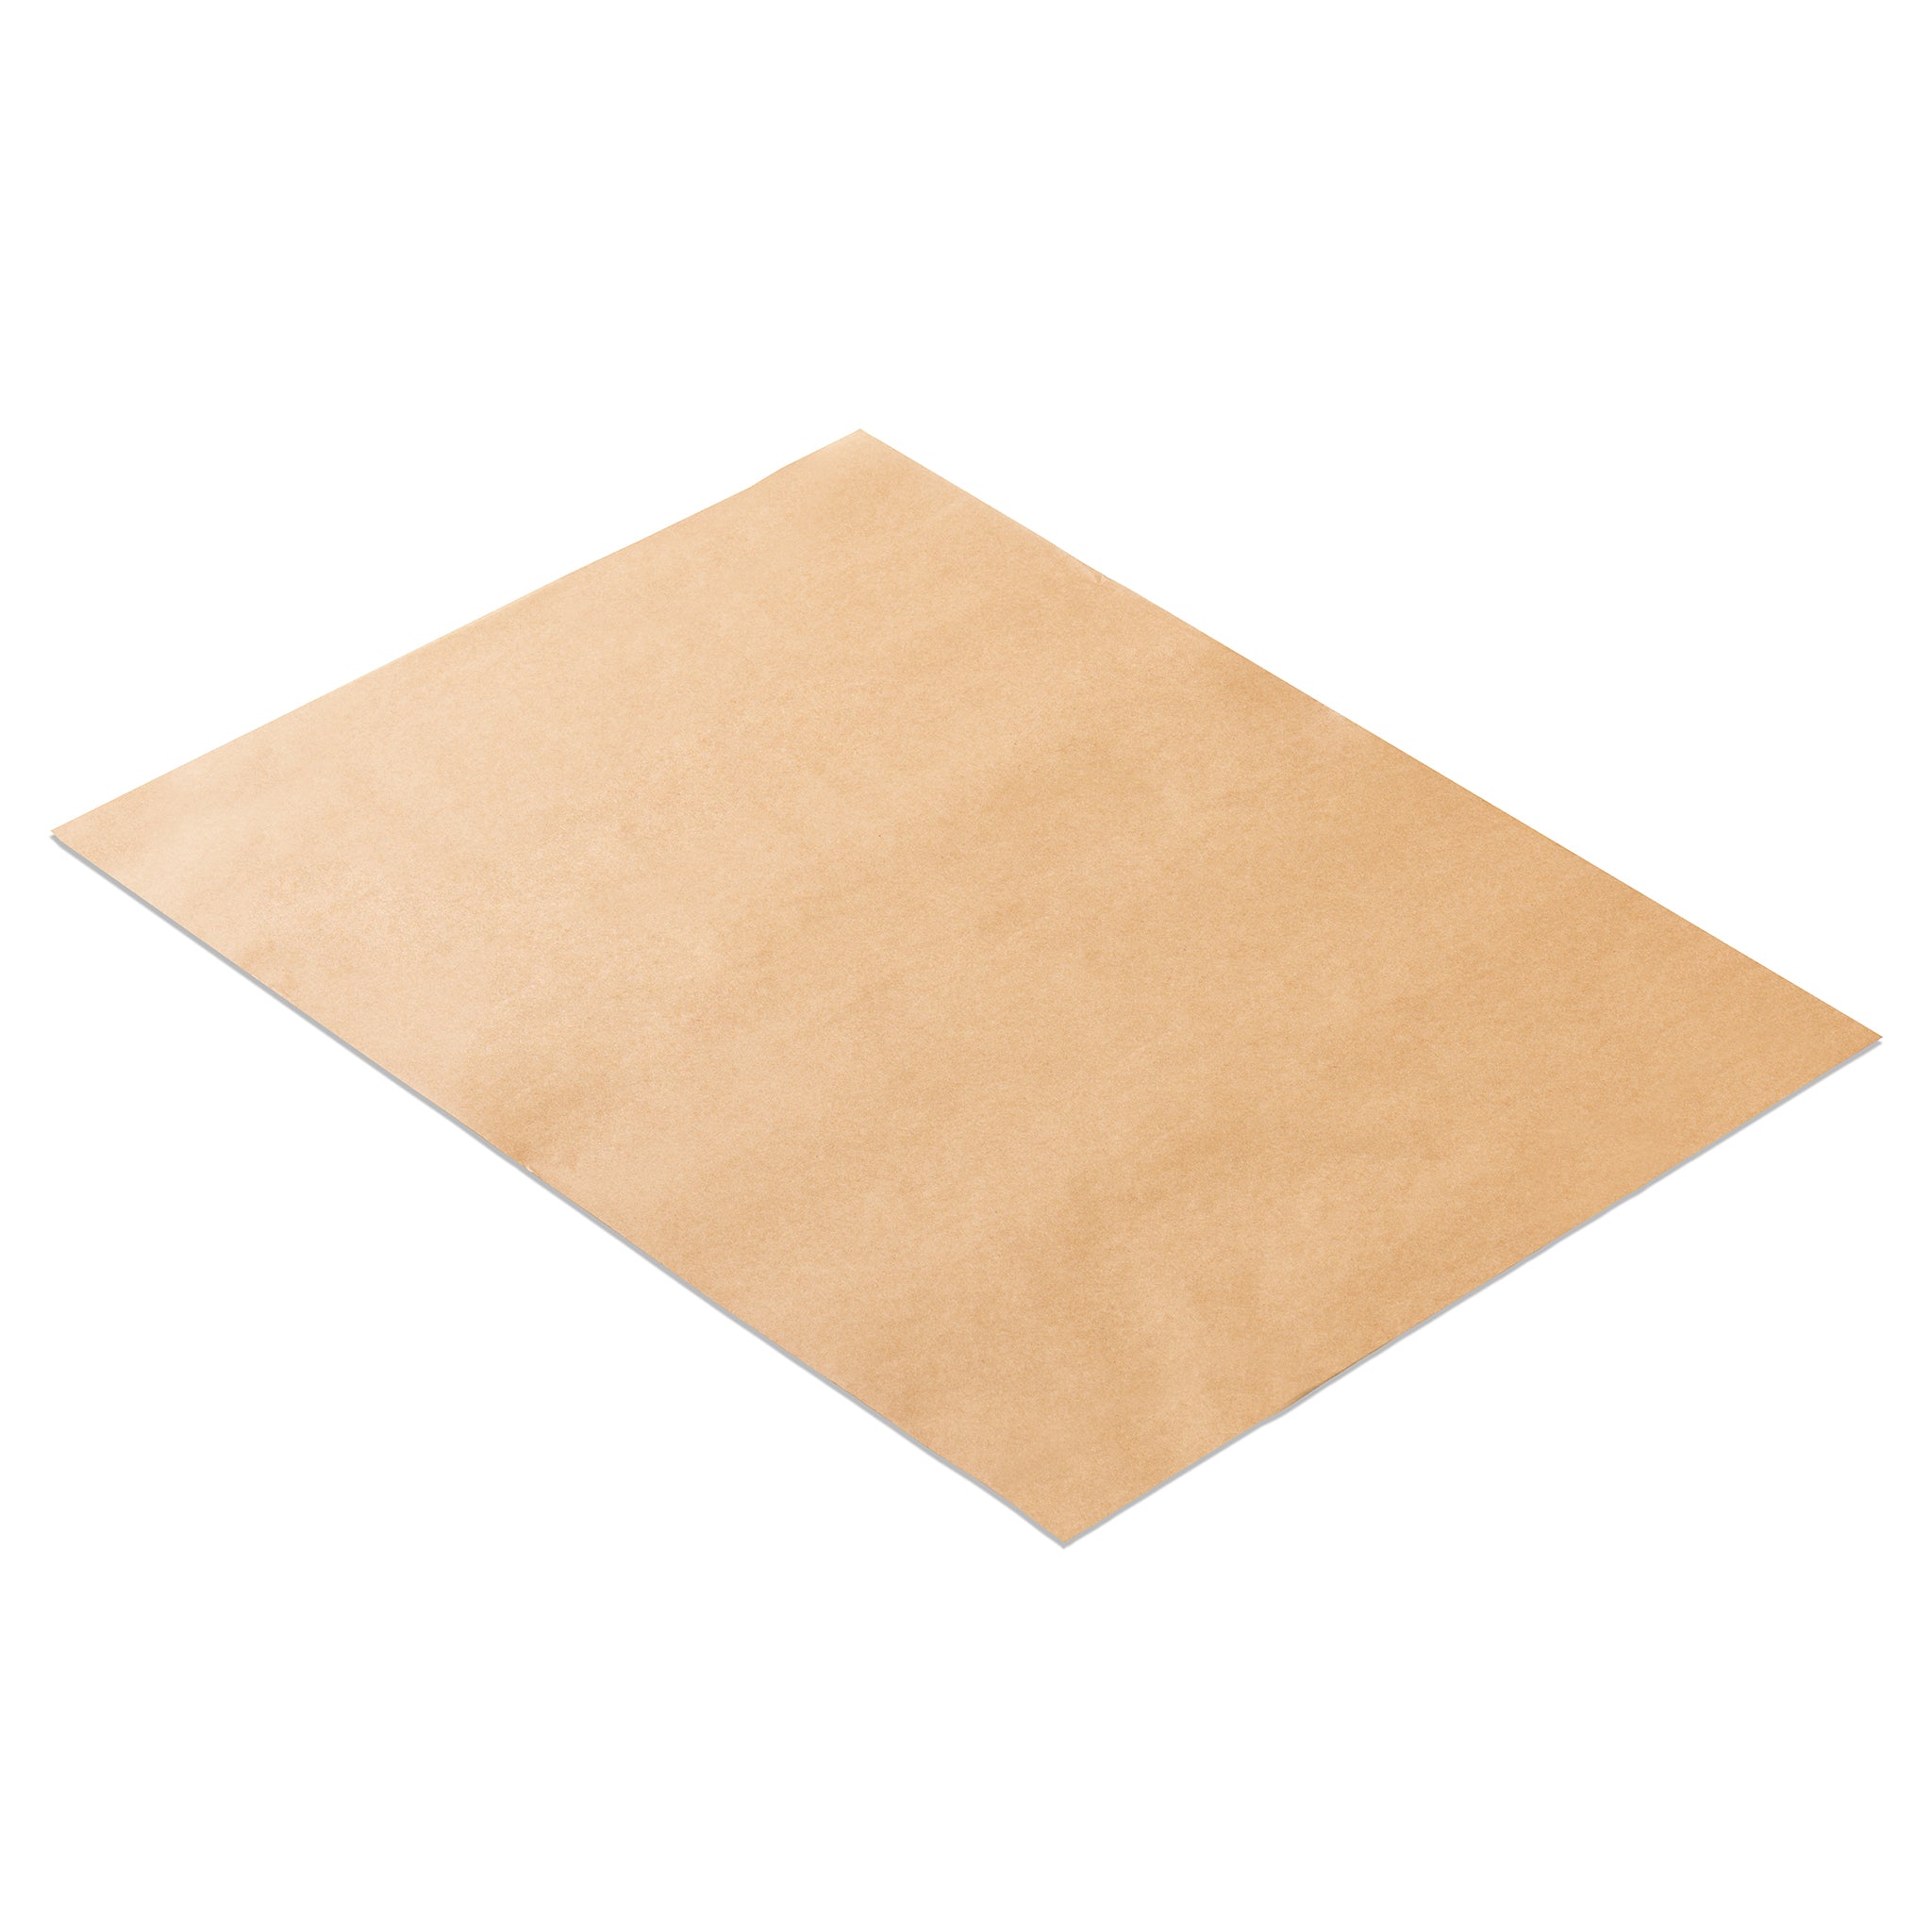 For Good FSC Certified Parchment Paper Roll - 70sq ft - Non-Toxic